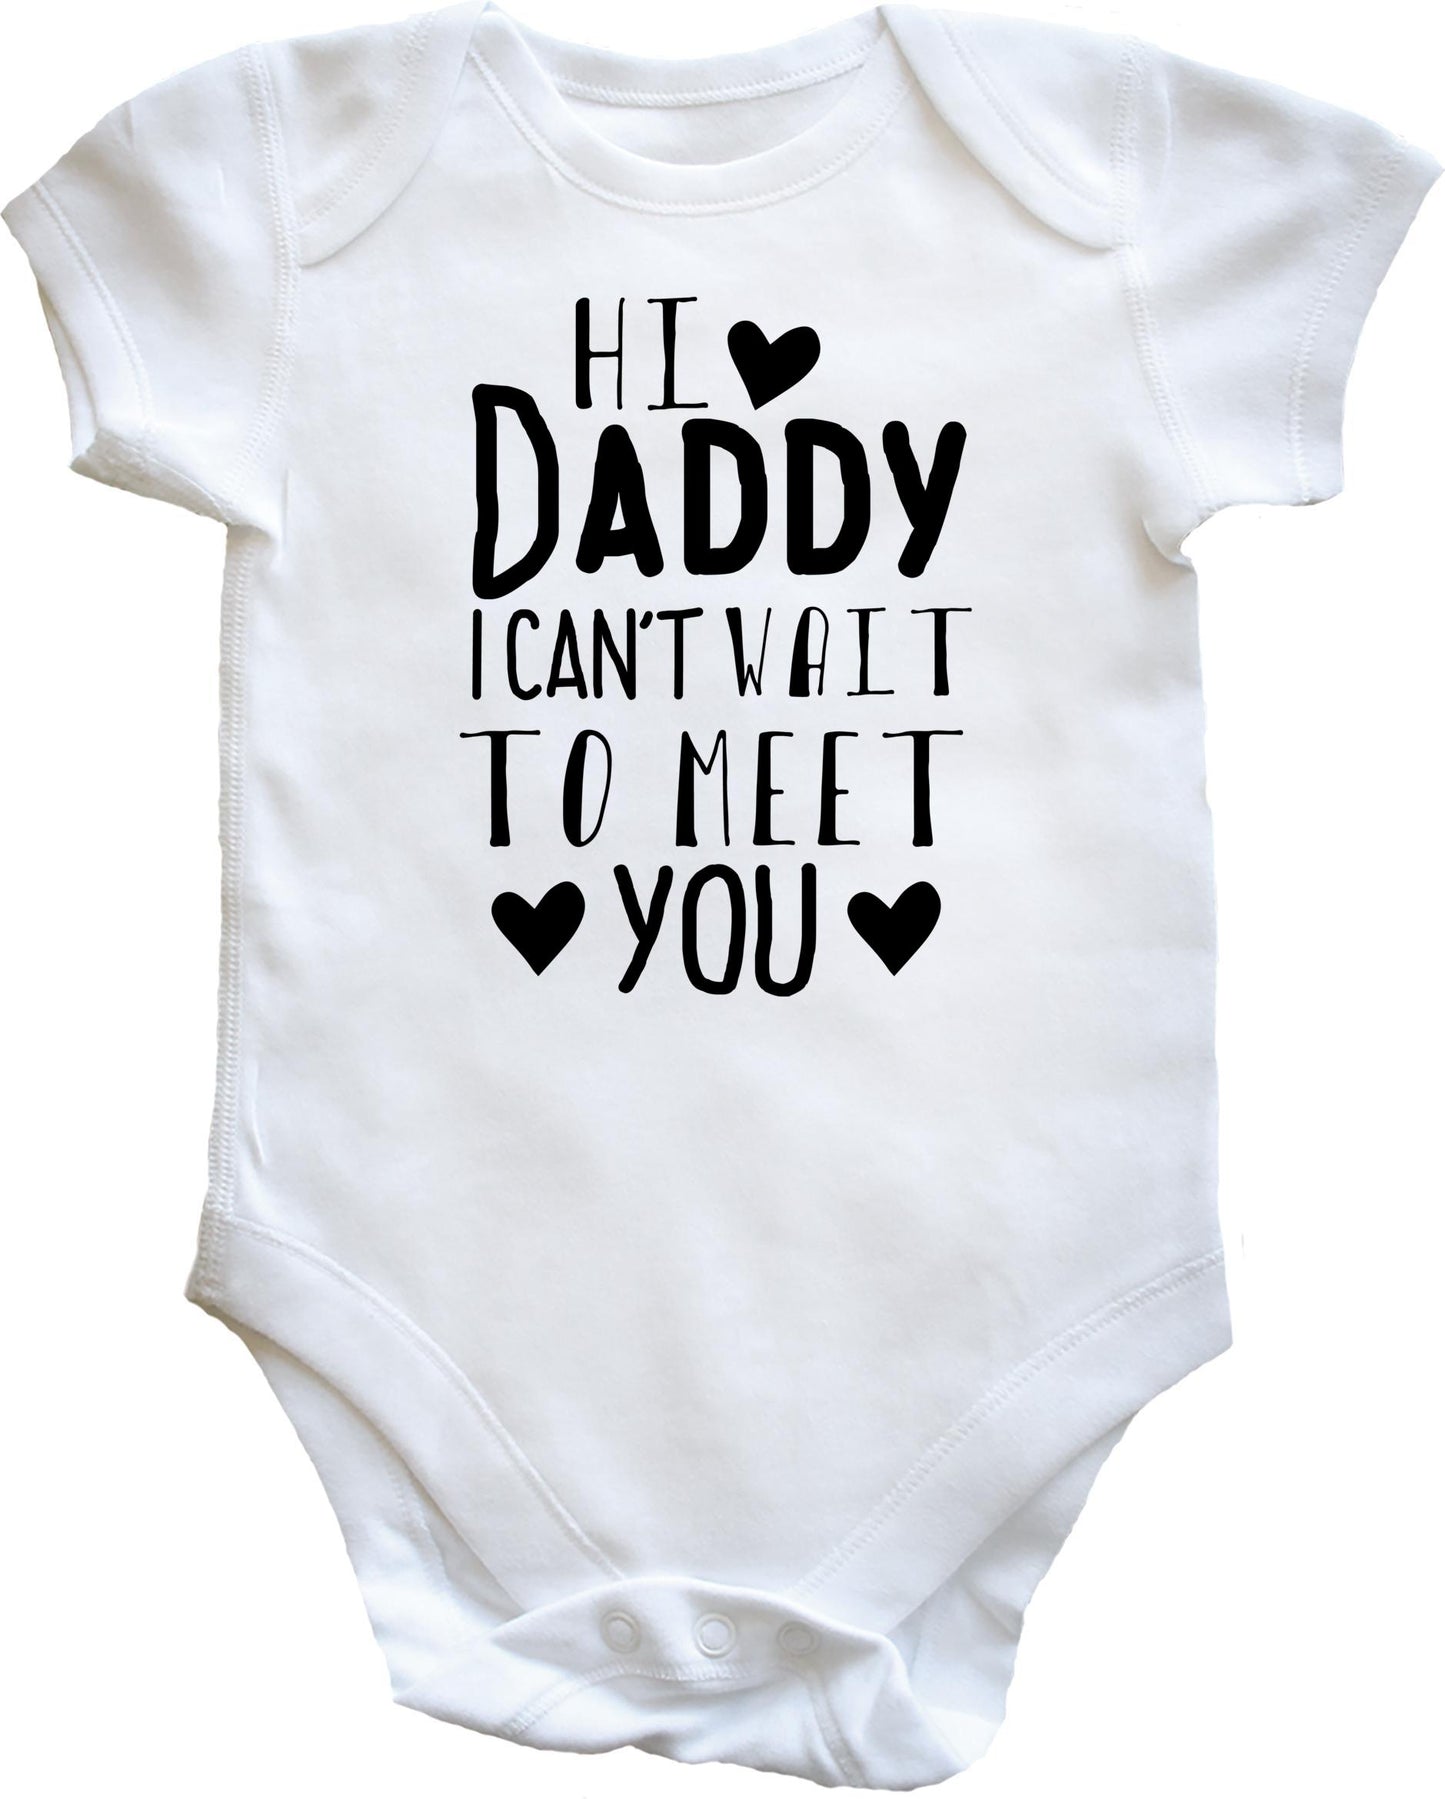 Hi Daddy I Can't Wait To Meet You baby vest